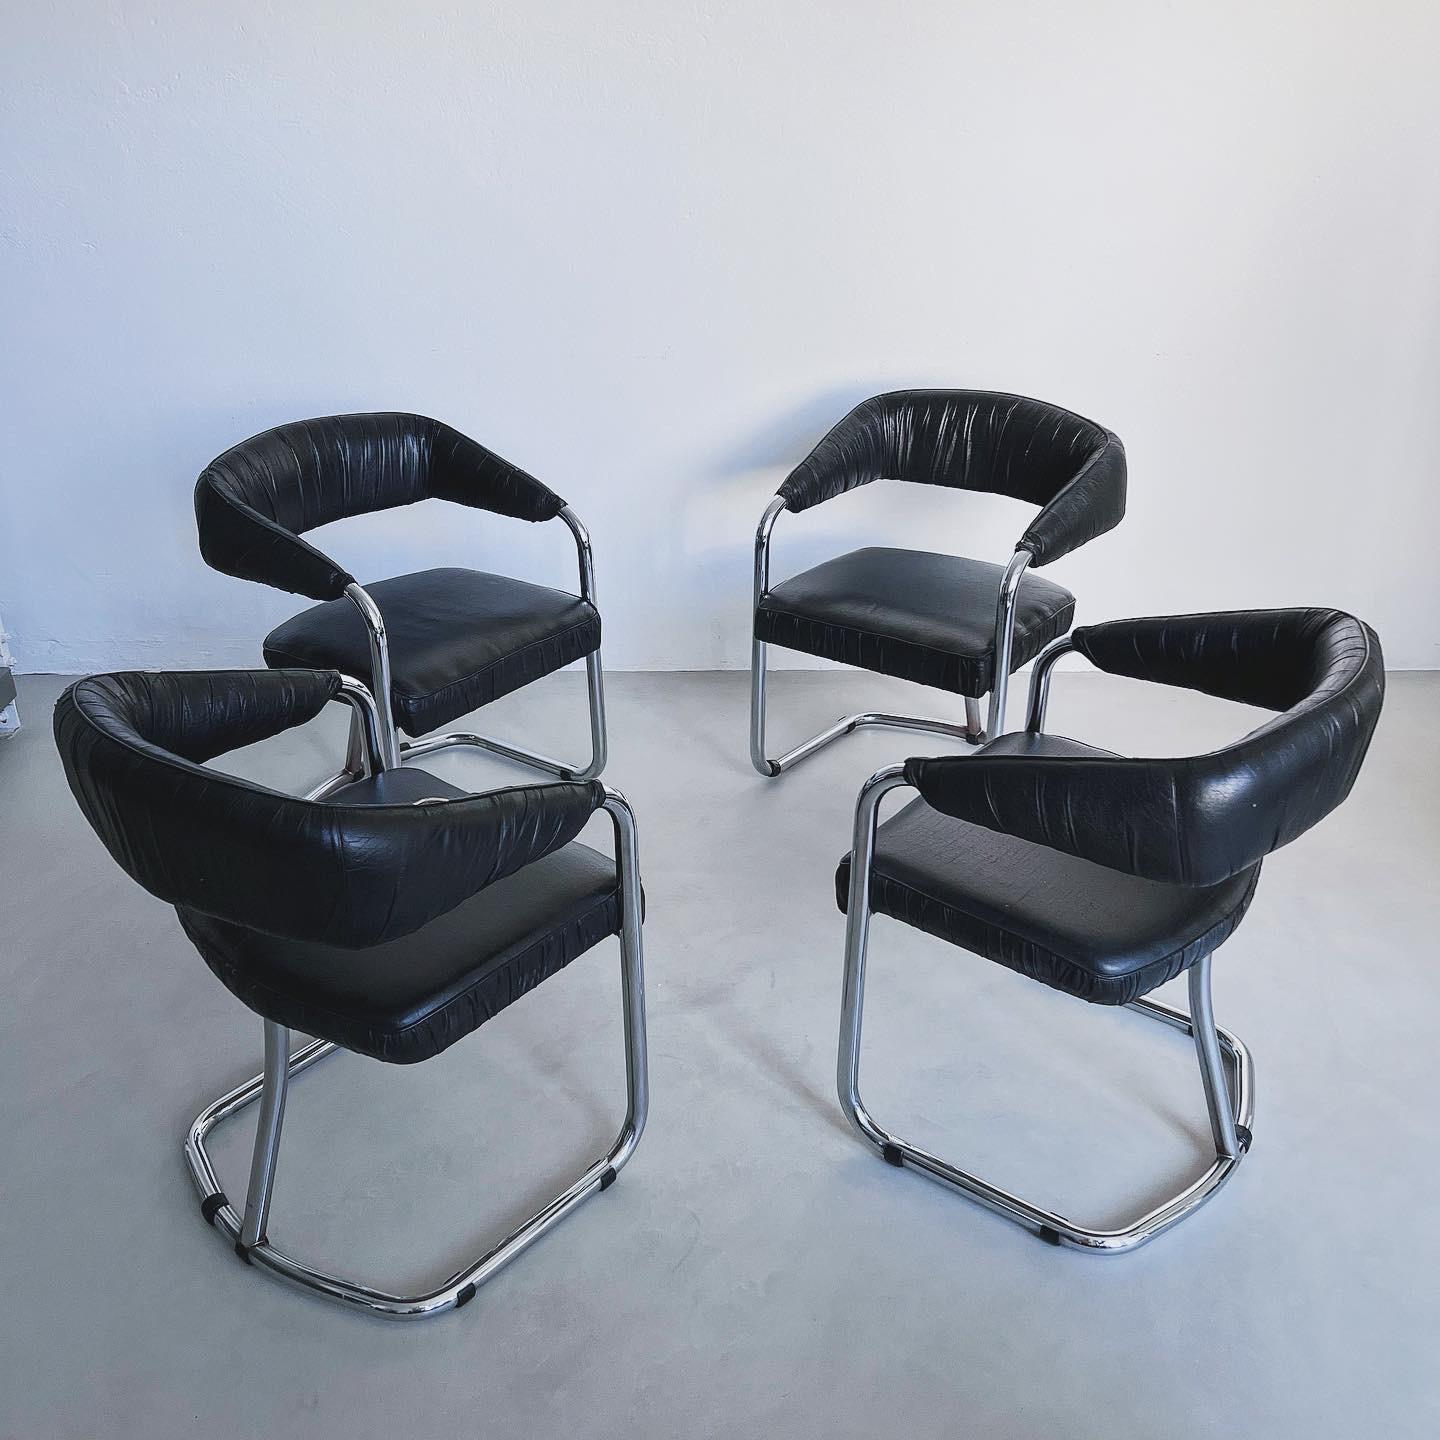 Late 20th Century Chromed Arm Chairs, 1970s Style